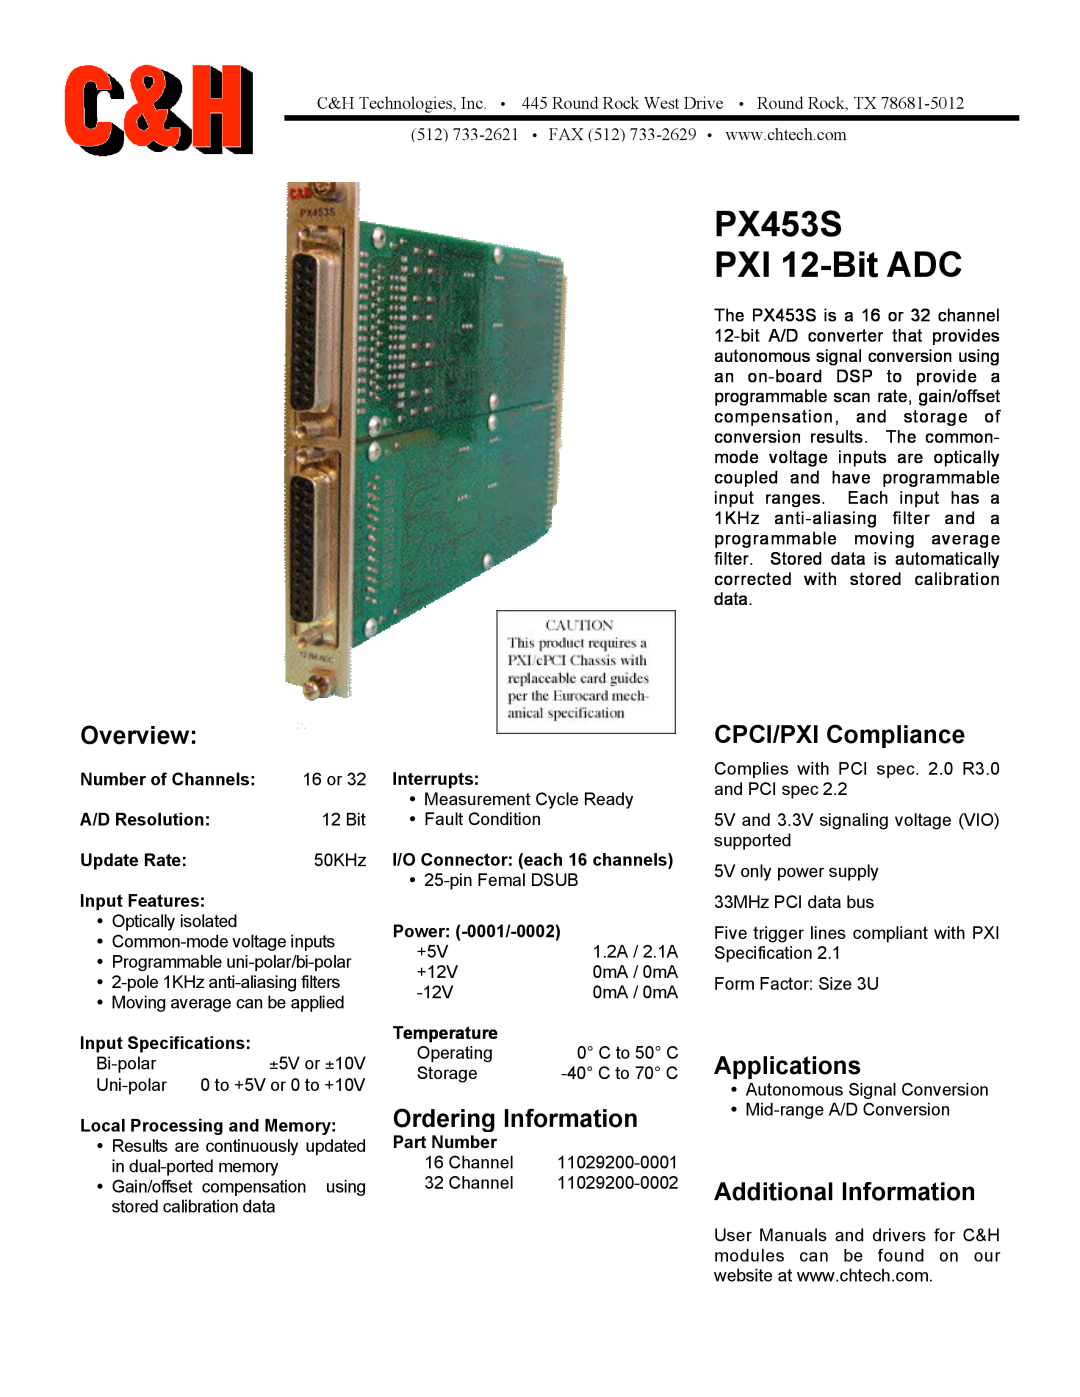 CH Tech user manual PX453S PXI 12-Bit ADC, Overview, Ordering Information, CPCI/PXI Compliance, Applications 